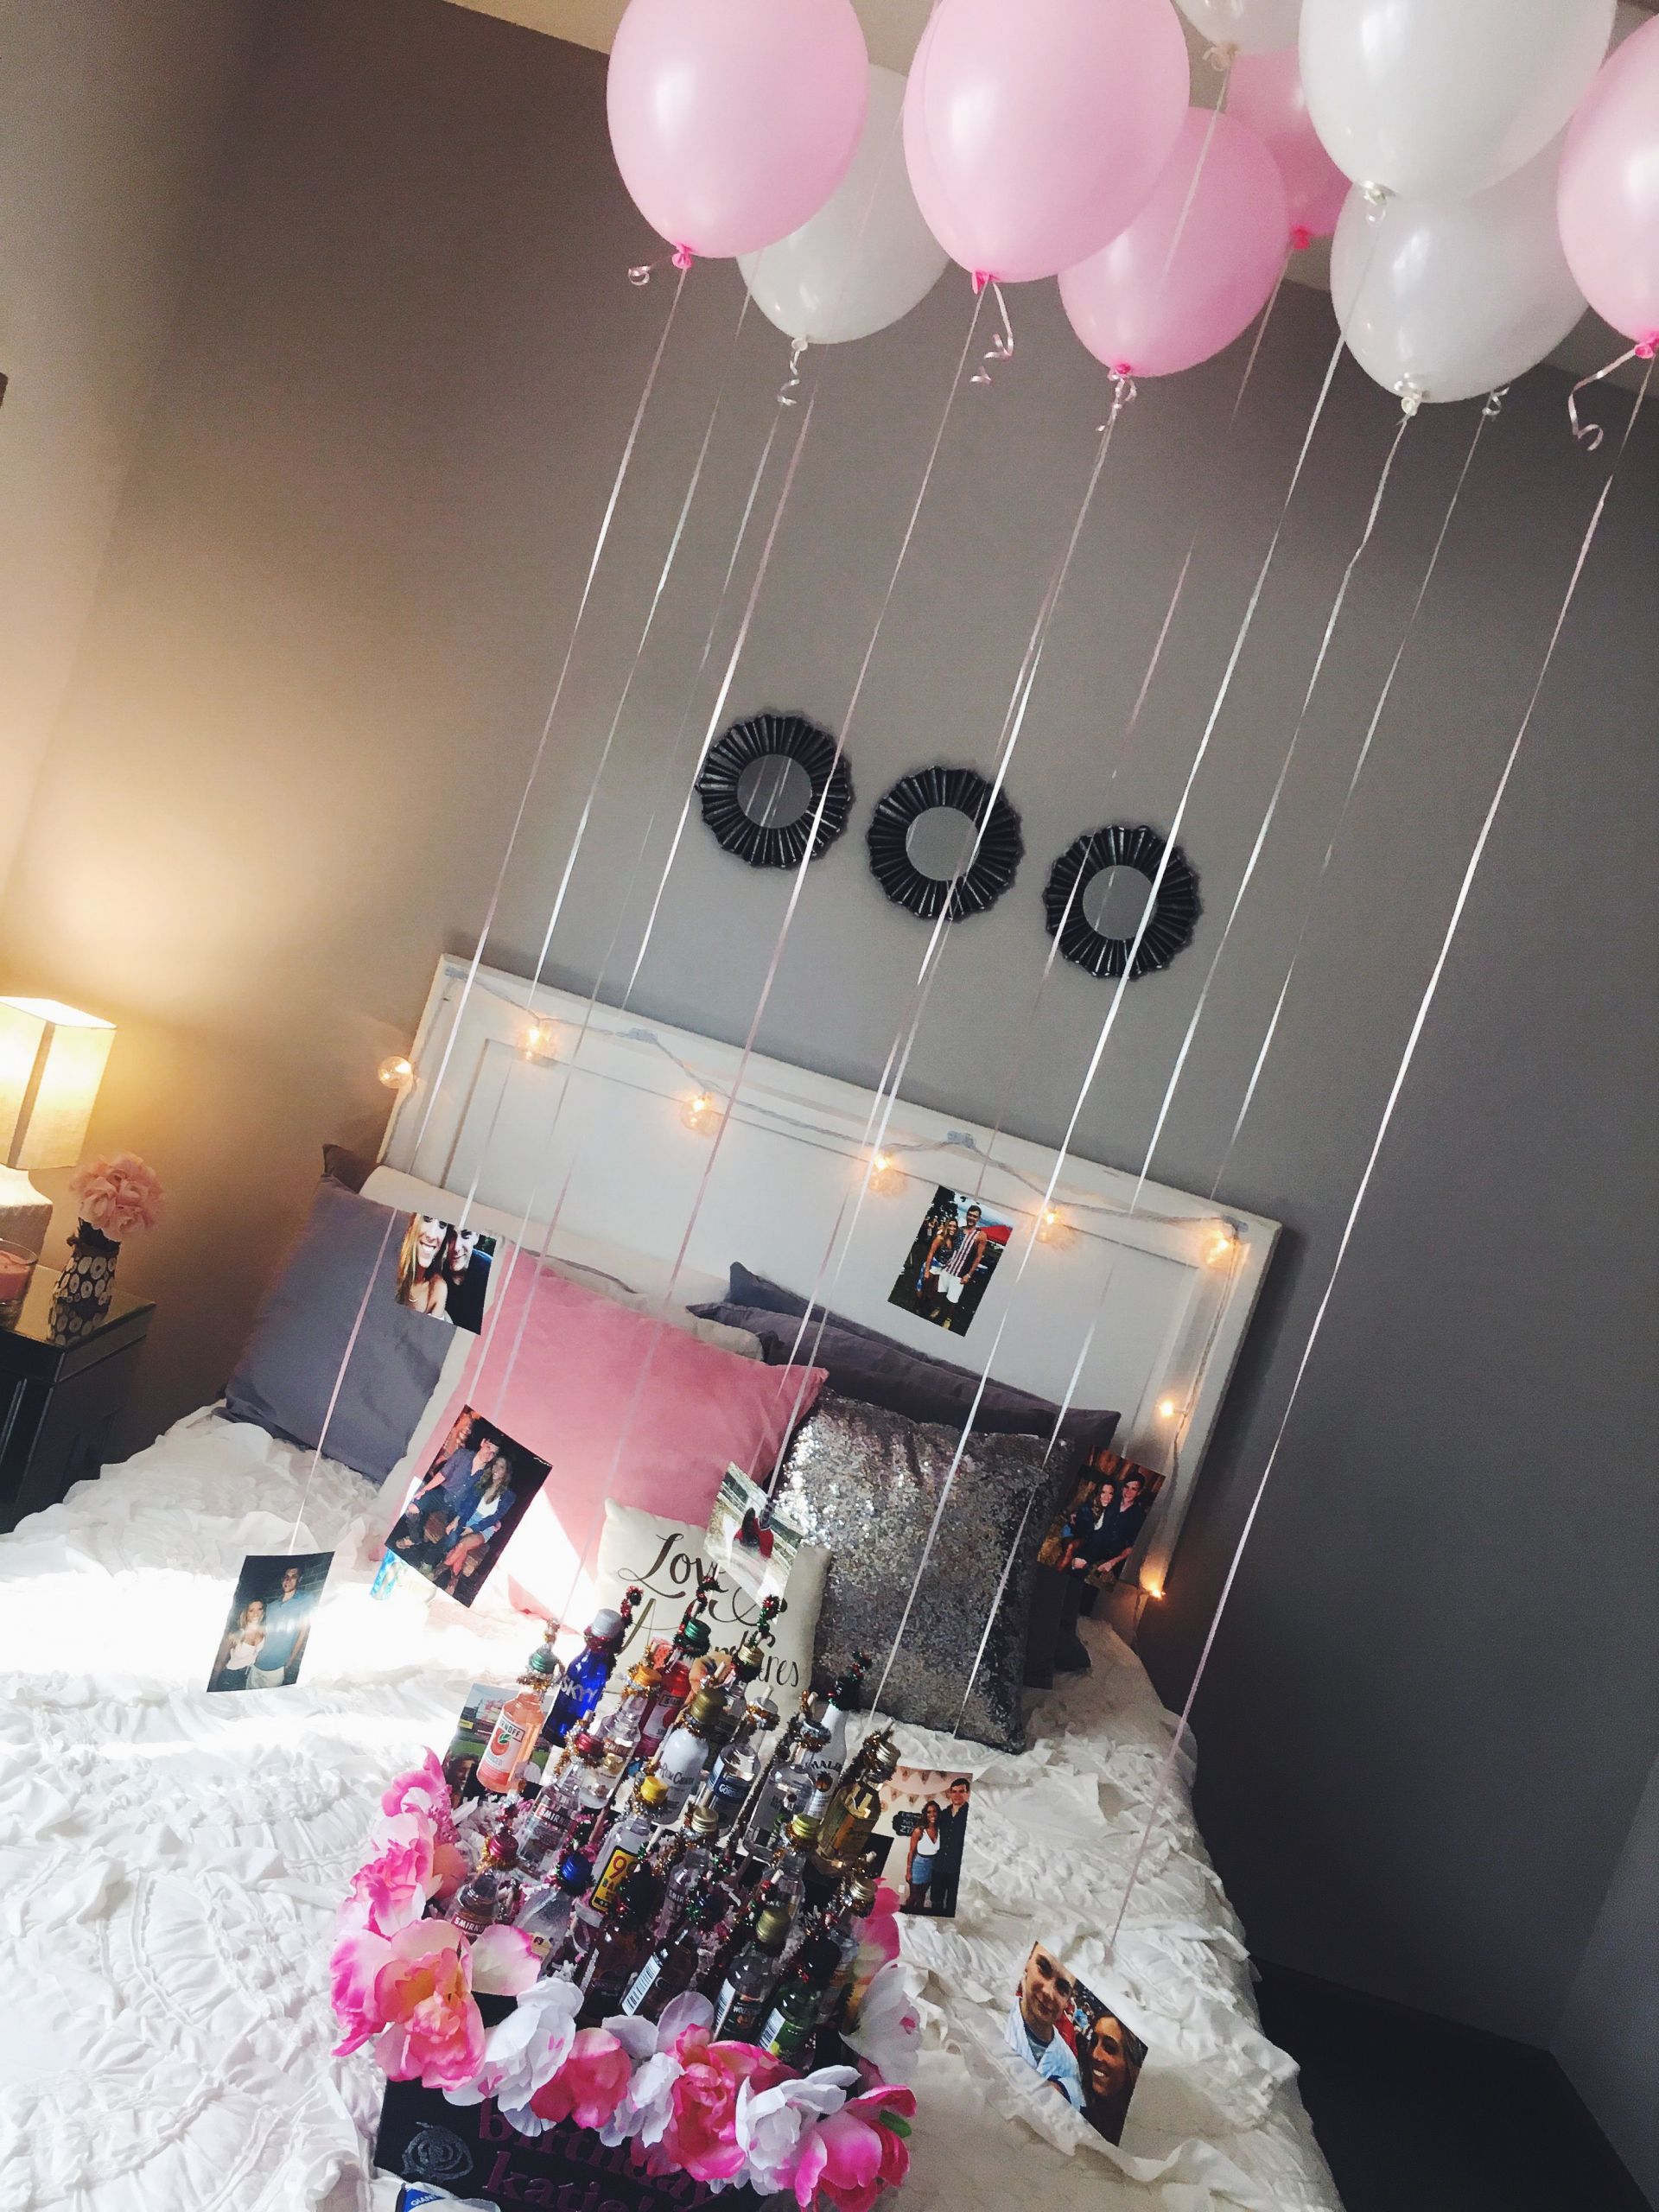 Best Gift Ideas For Your Girlfriend
 easy and cute decorations for a friend or girlfriends 21st